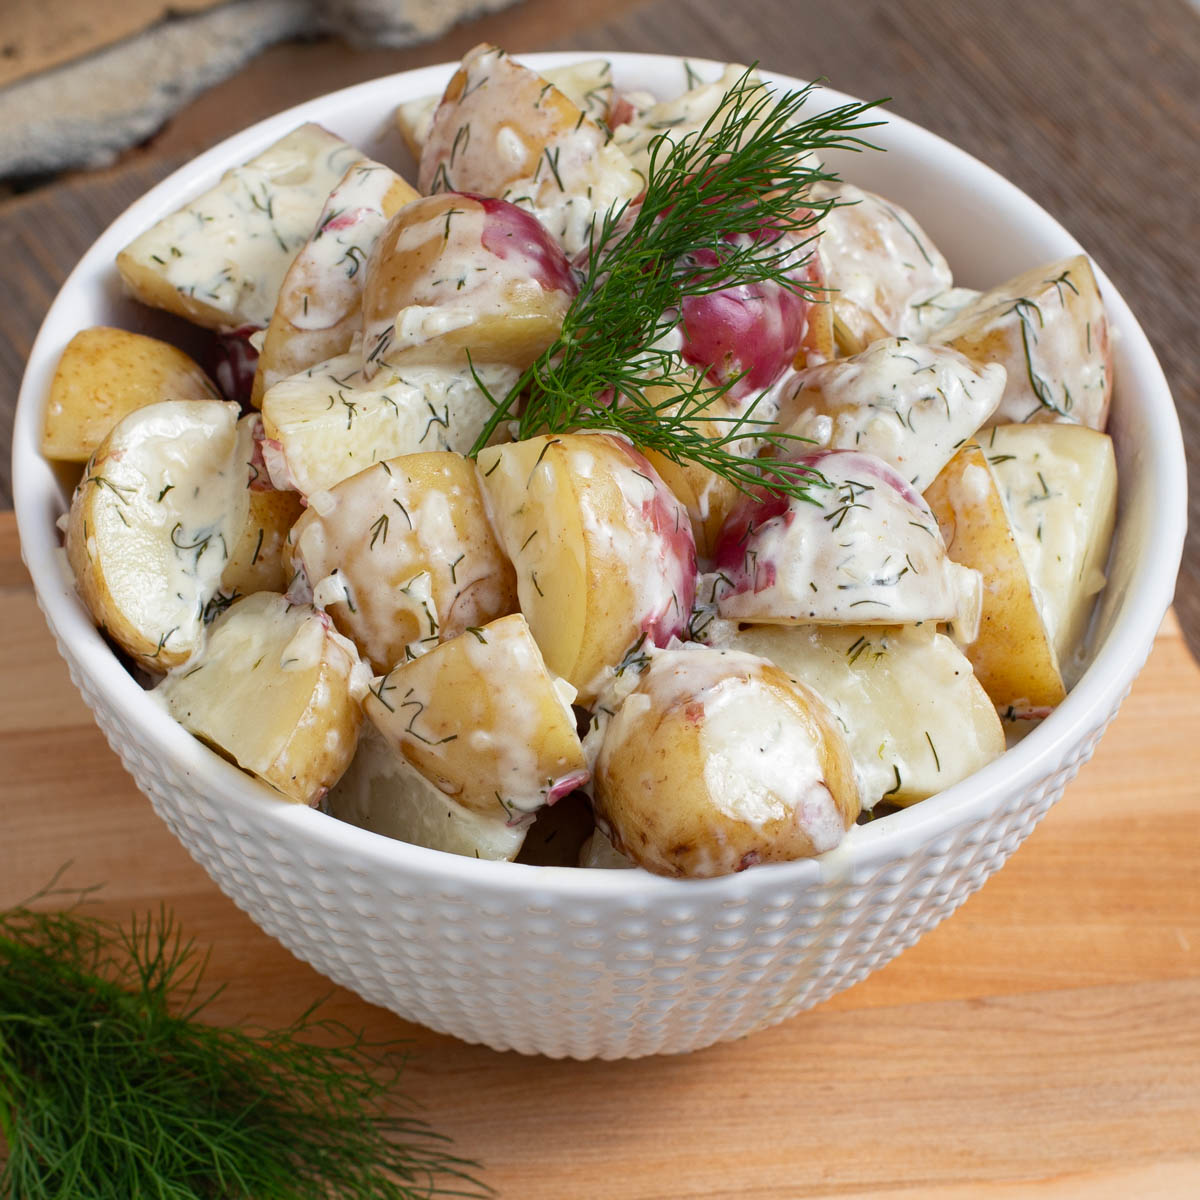 Potatoes covered in a creamy dill sauce in a white bowl.